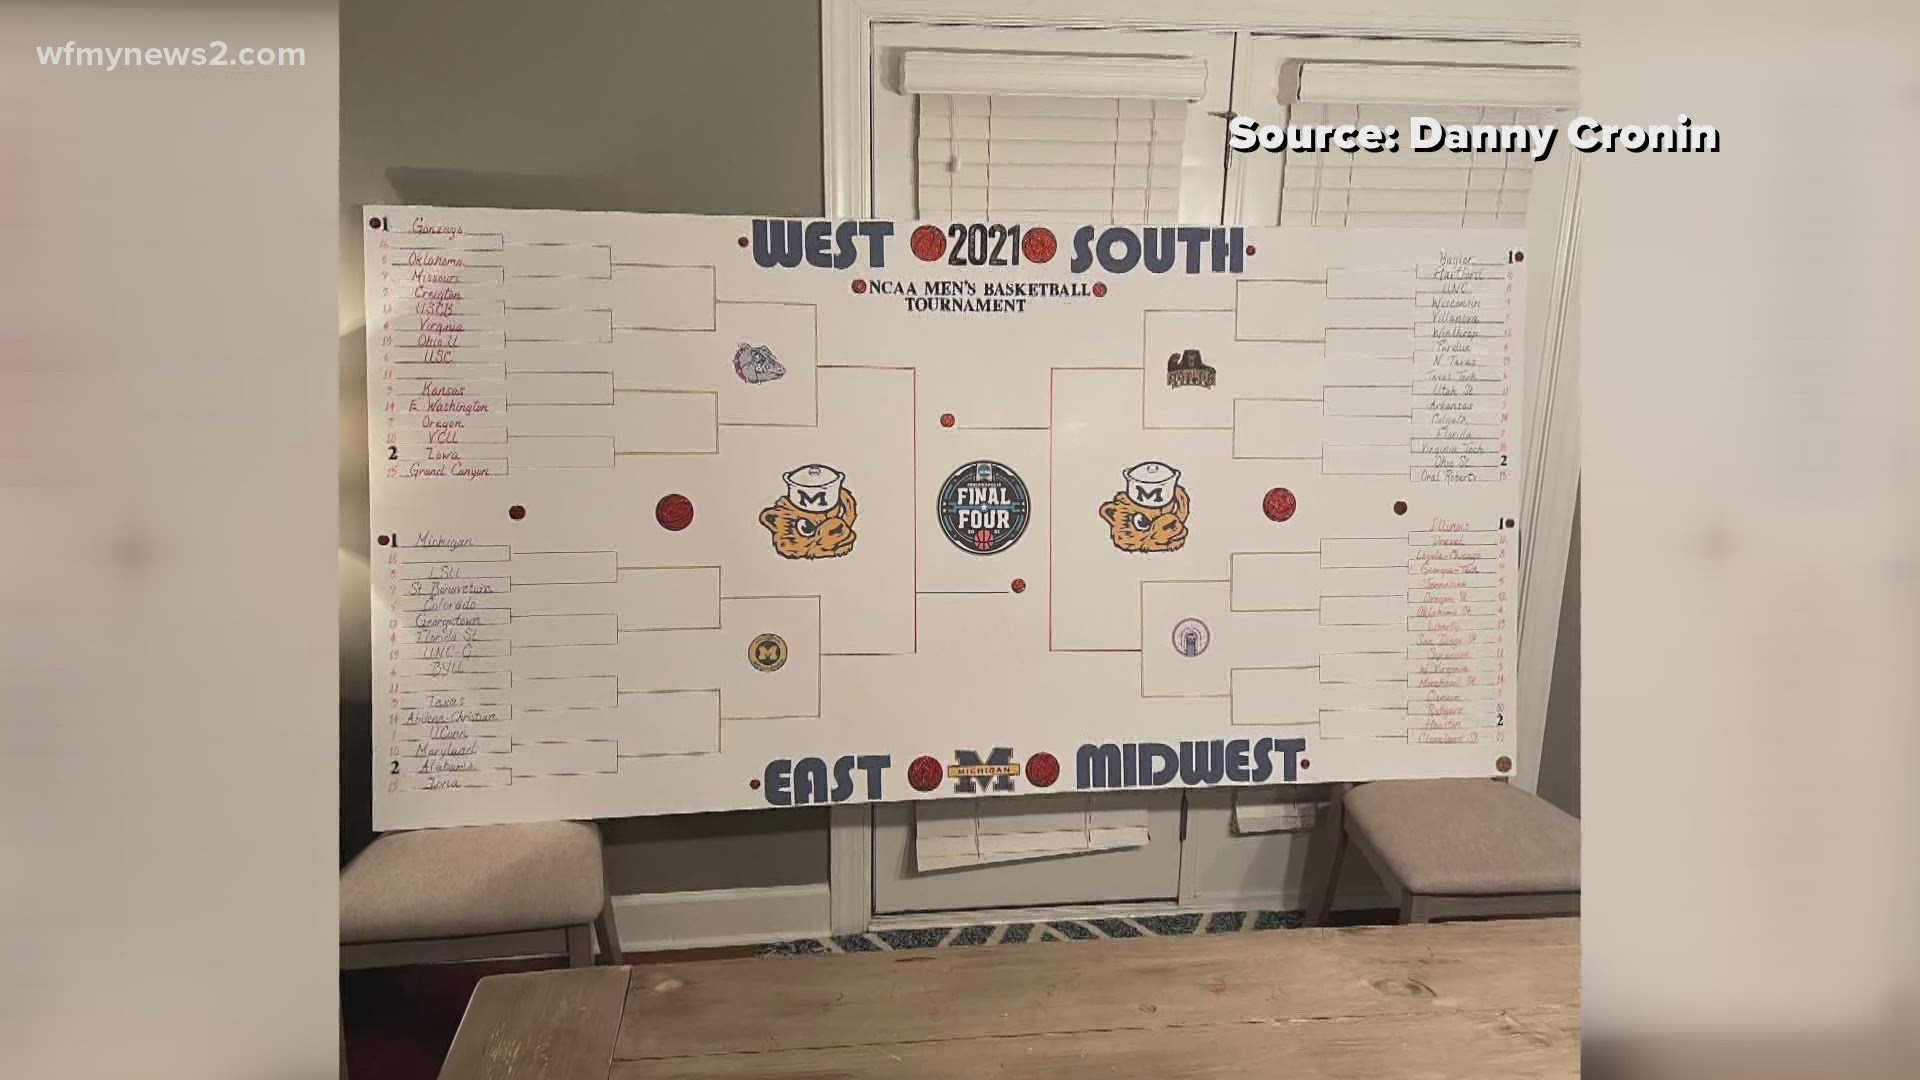 For the past 33 years, a High Point man has made a larger-than-life NCAA tournament bracket.